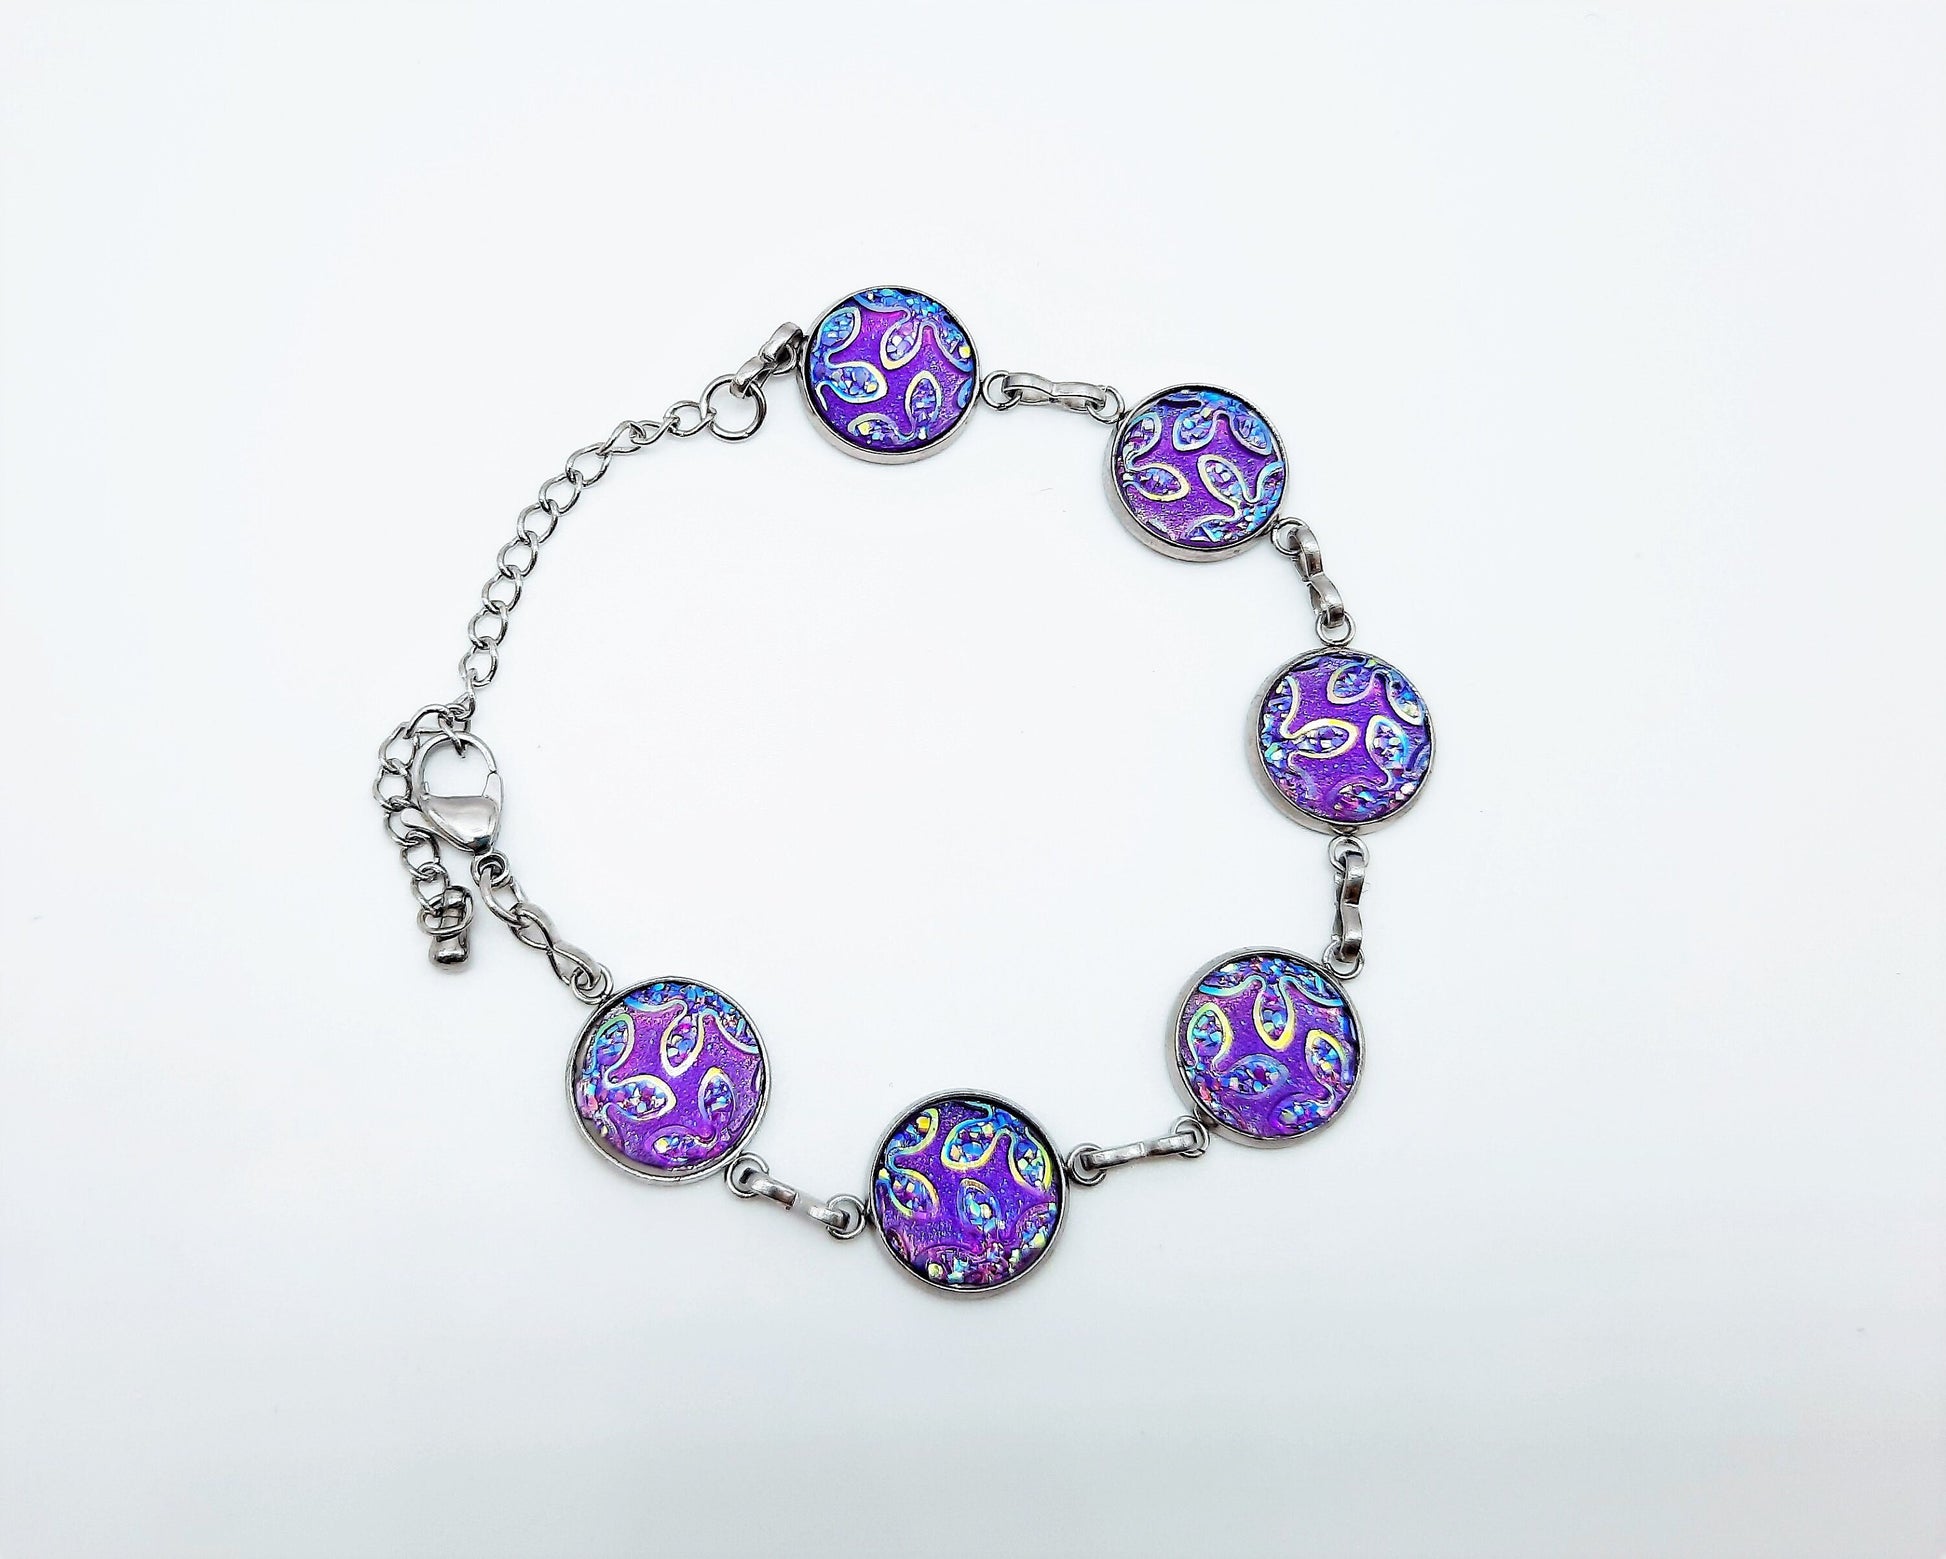 Handcrafted Purple Iridescent Resin Link Bracelet - Hypoallergenic Silver Stainless Steel - Adjustable Fit - Lobster Claw Closure